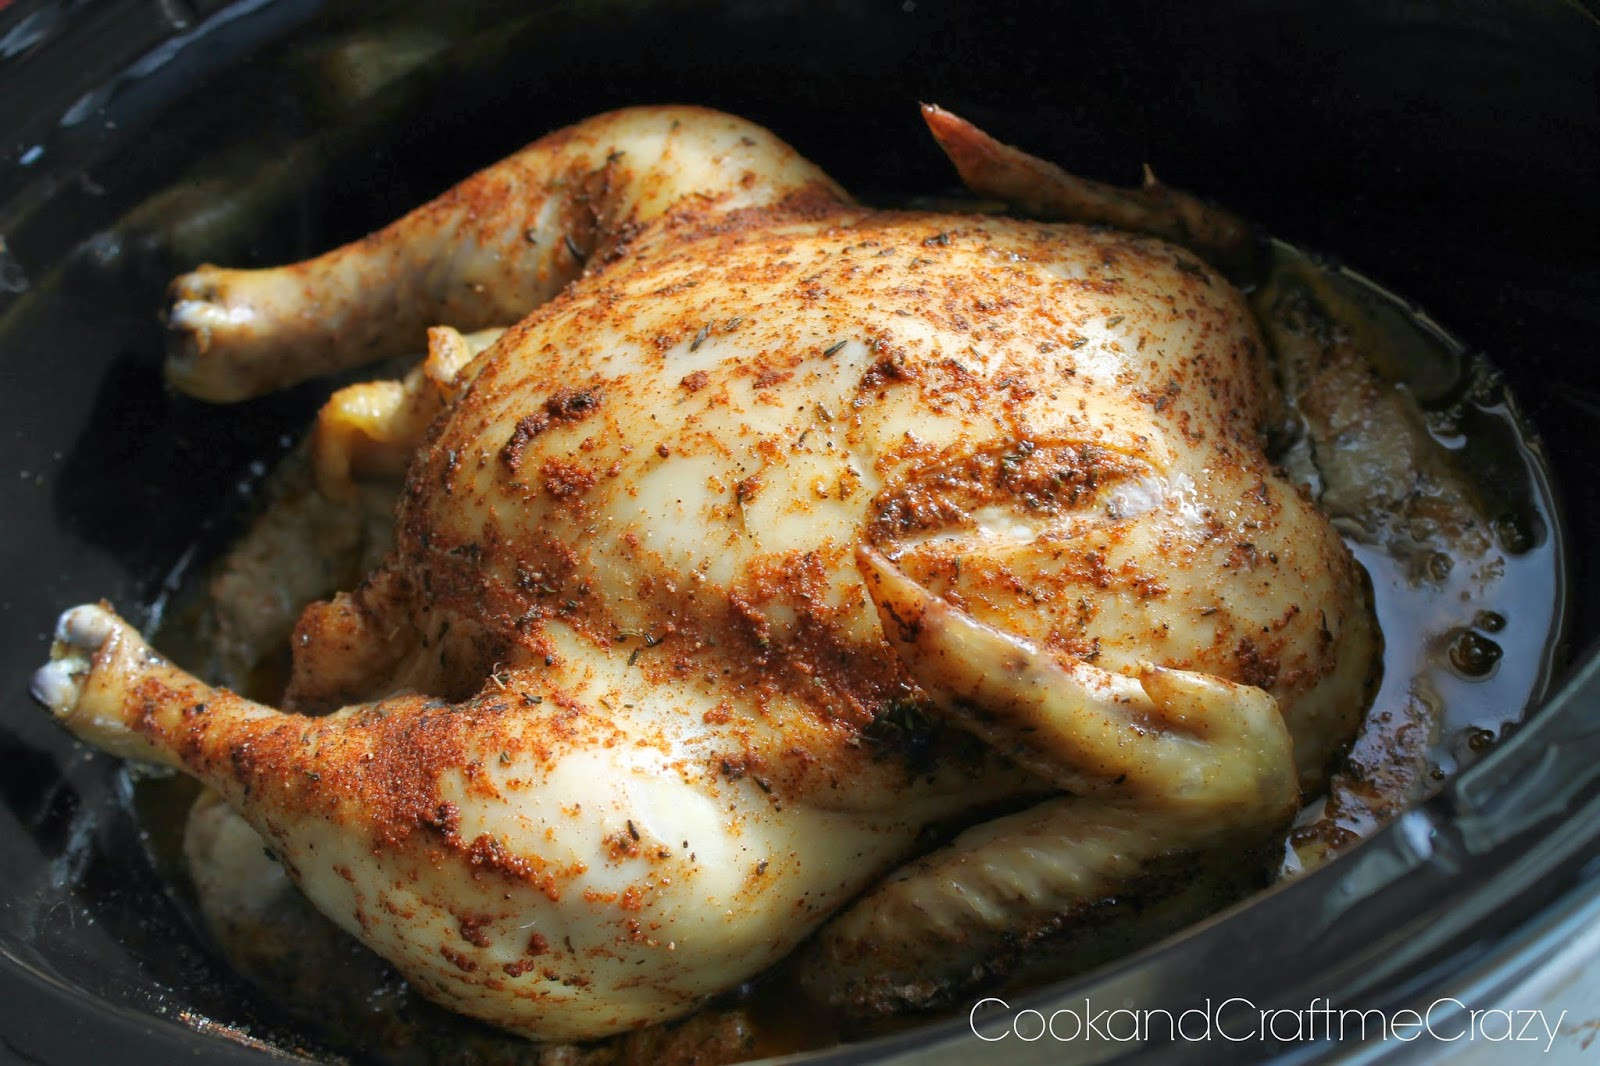 Cook Whole Chicken In Crock Pot
 Cook and Craft Me Crazy Crock Pot Roasted Chicken